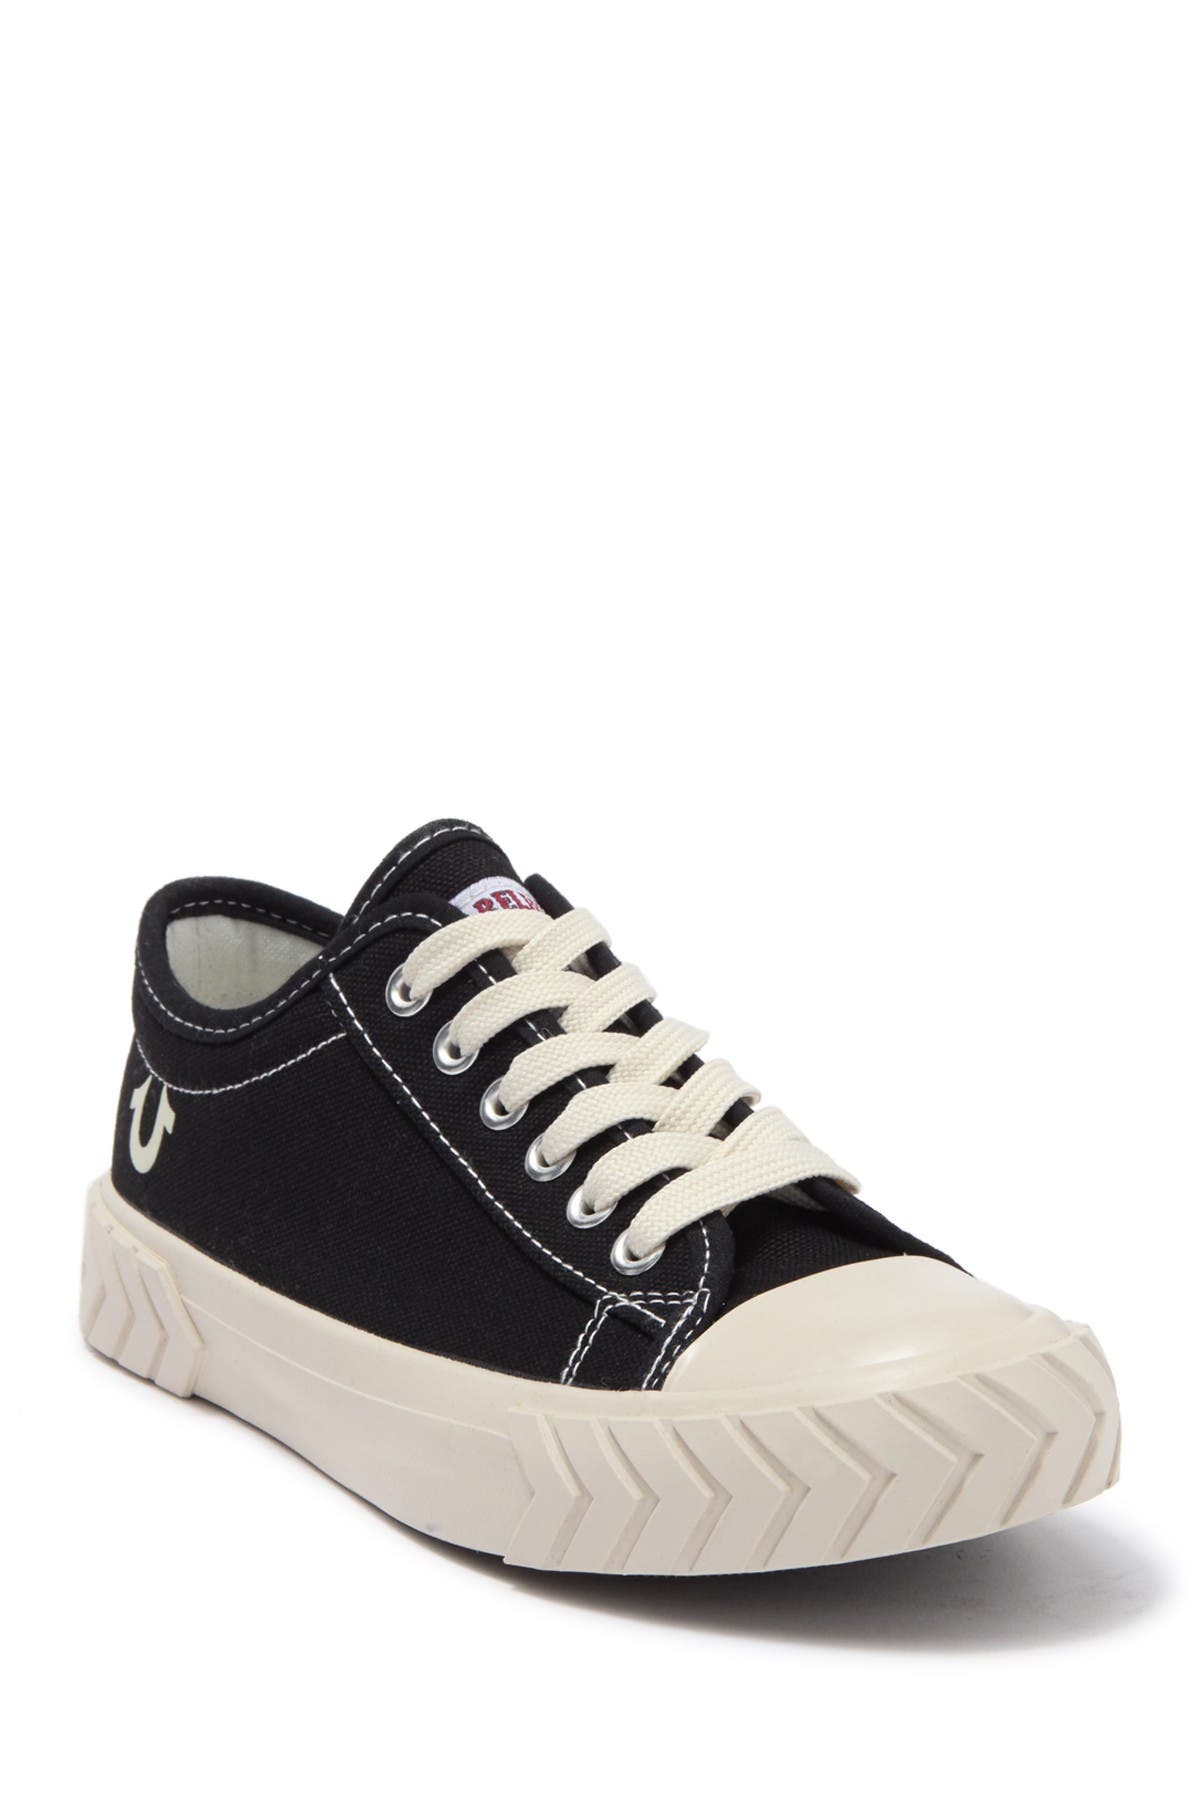 True Religion Canvas Lace Up Sneaker In Blk Canvas | ModeSens